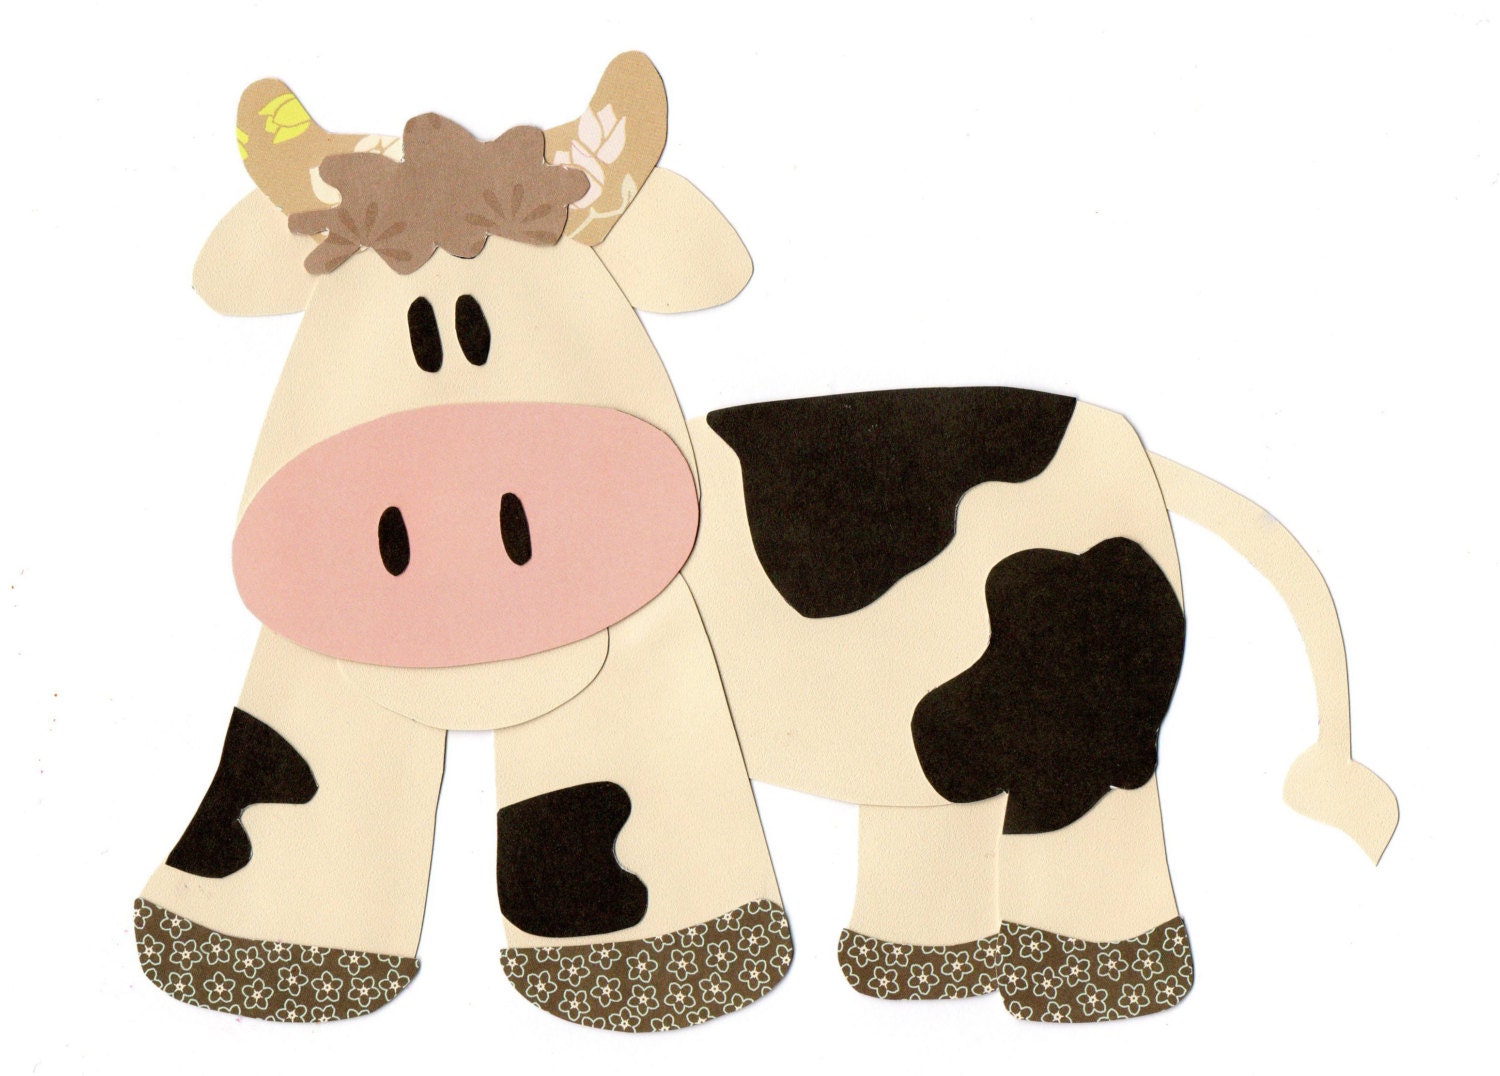 free downloadable templates of farm animals